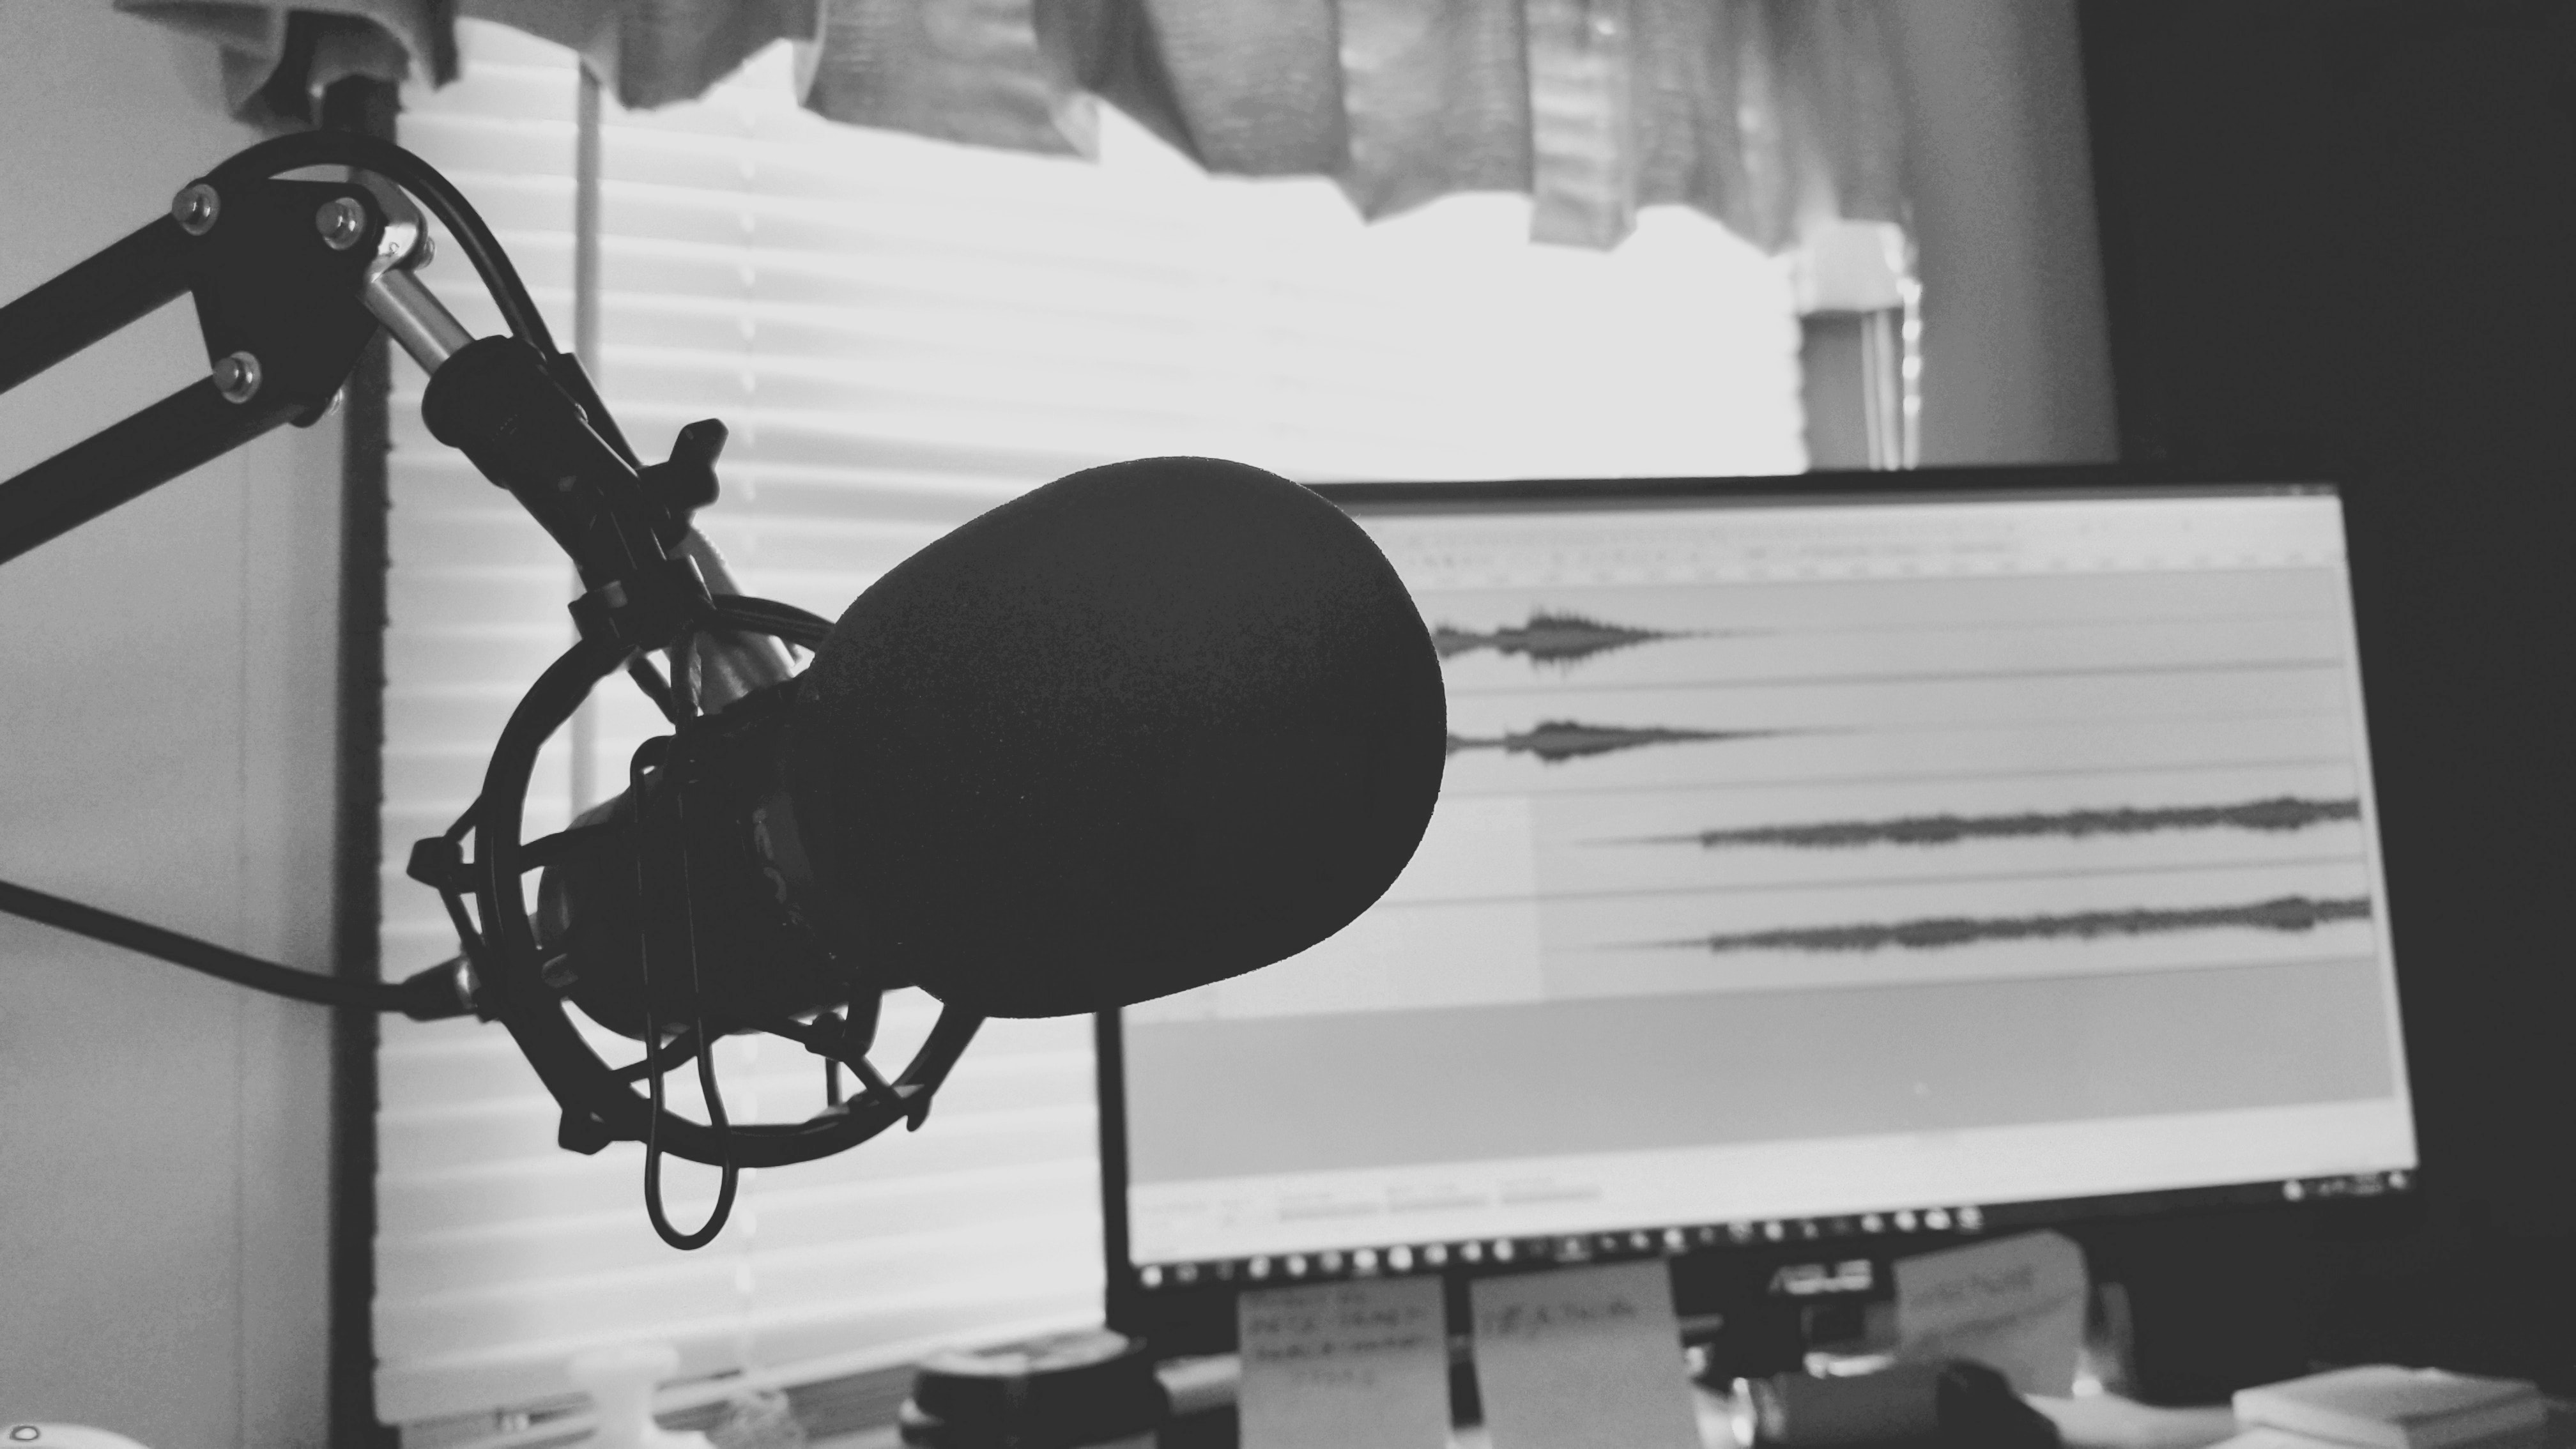 Black and white image of a podcast microphone with sound waves on a laptop in the background